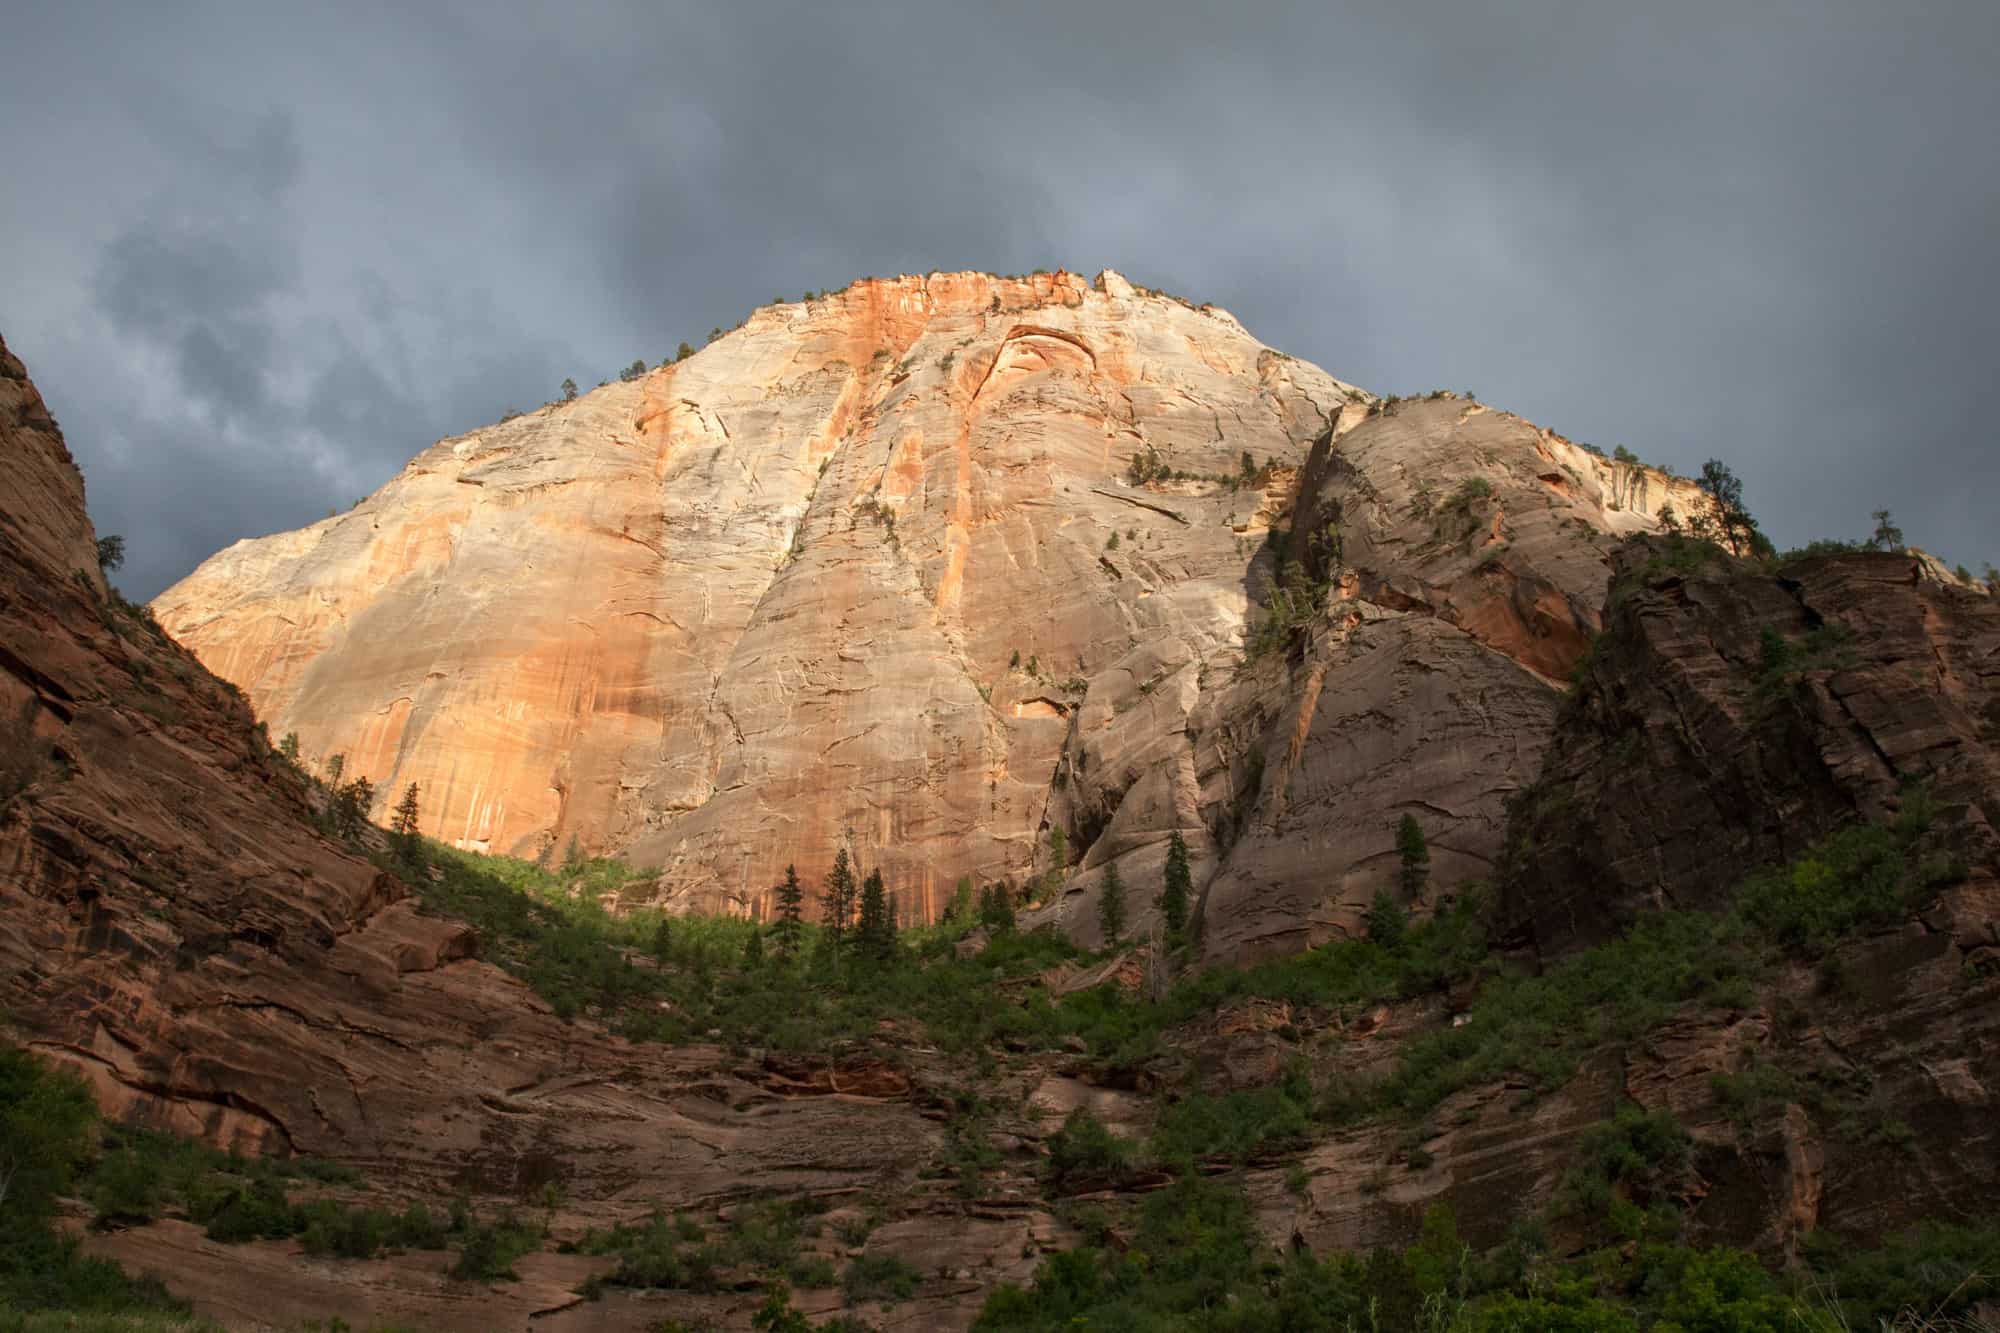 sunset leaves a glow on a white mountain in zion national park, one of the national parks near st. george, utah